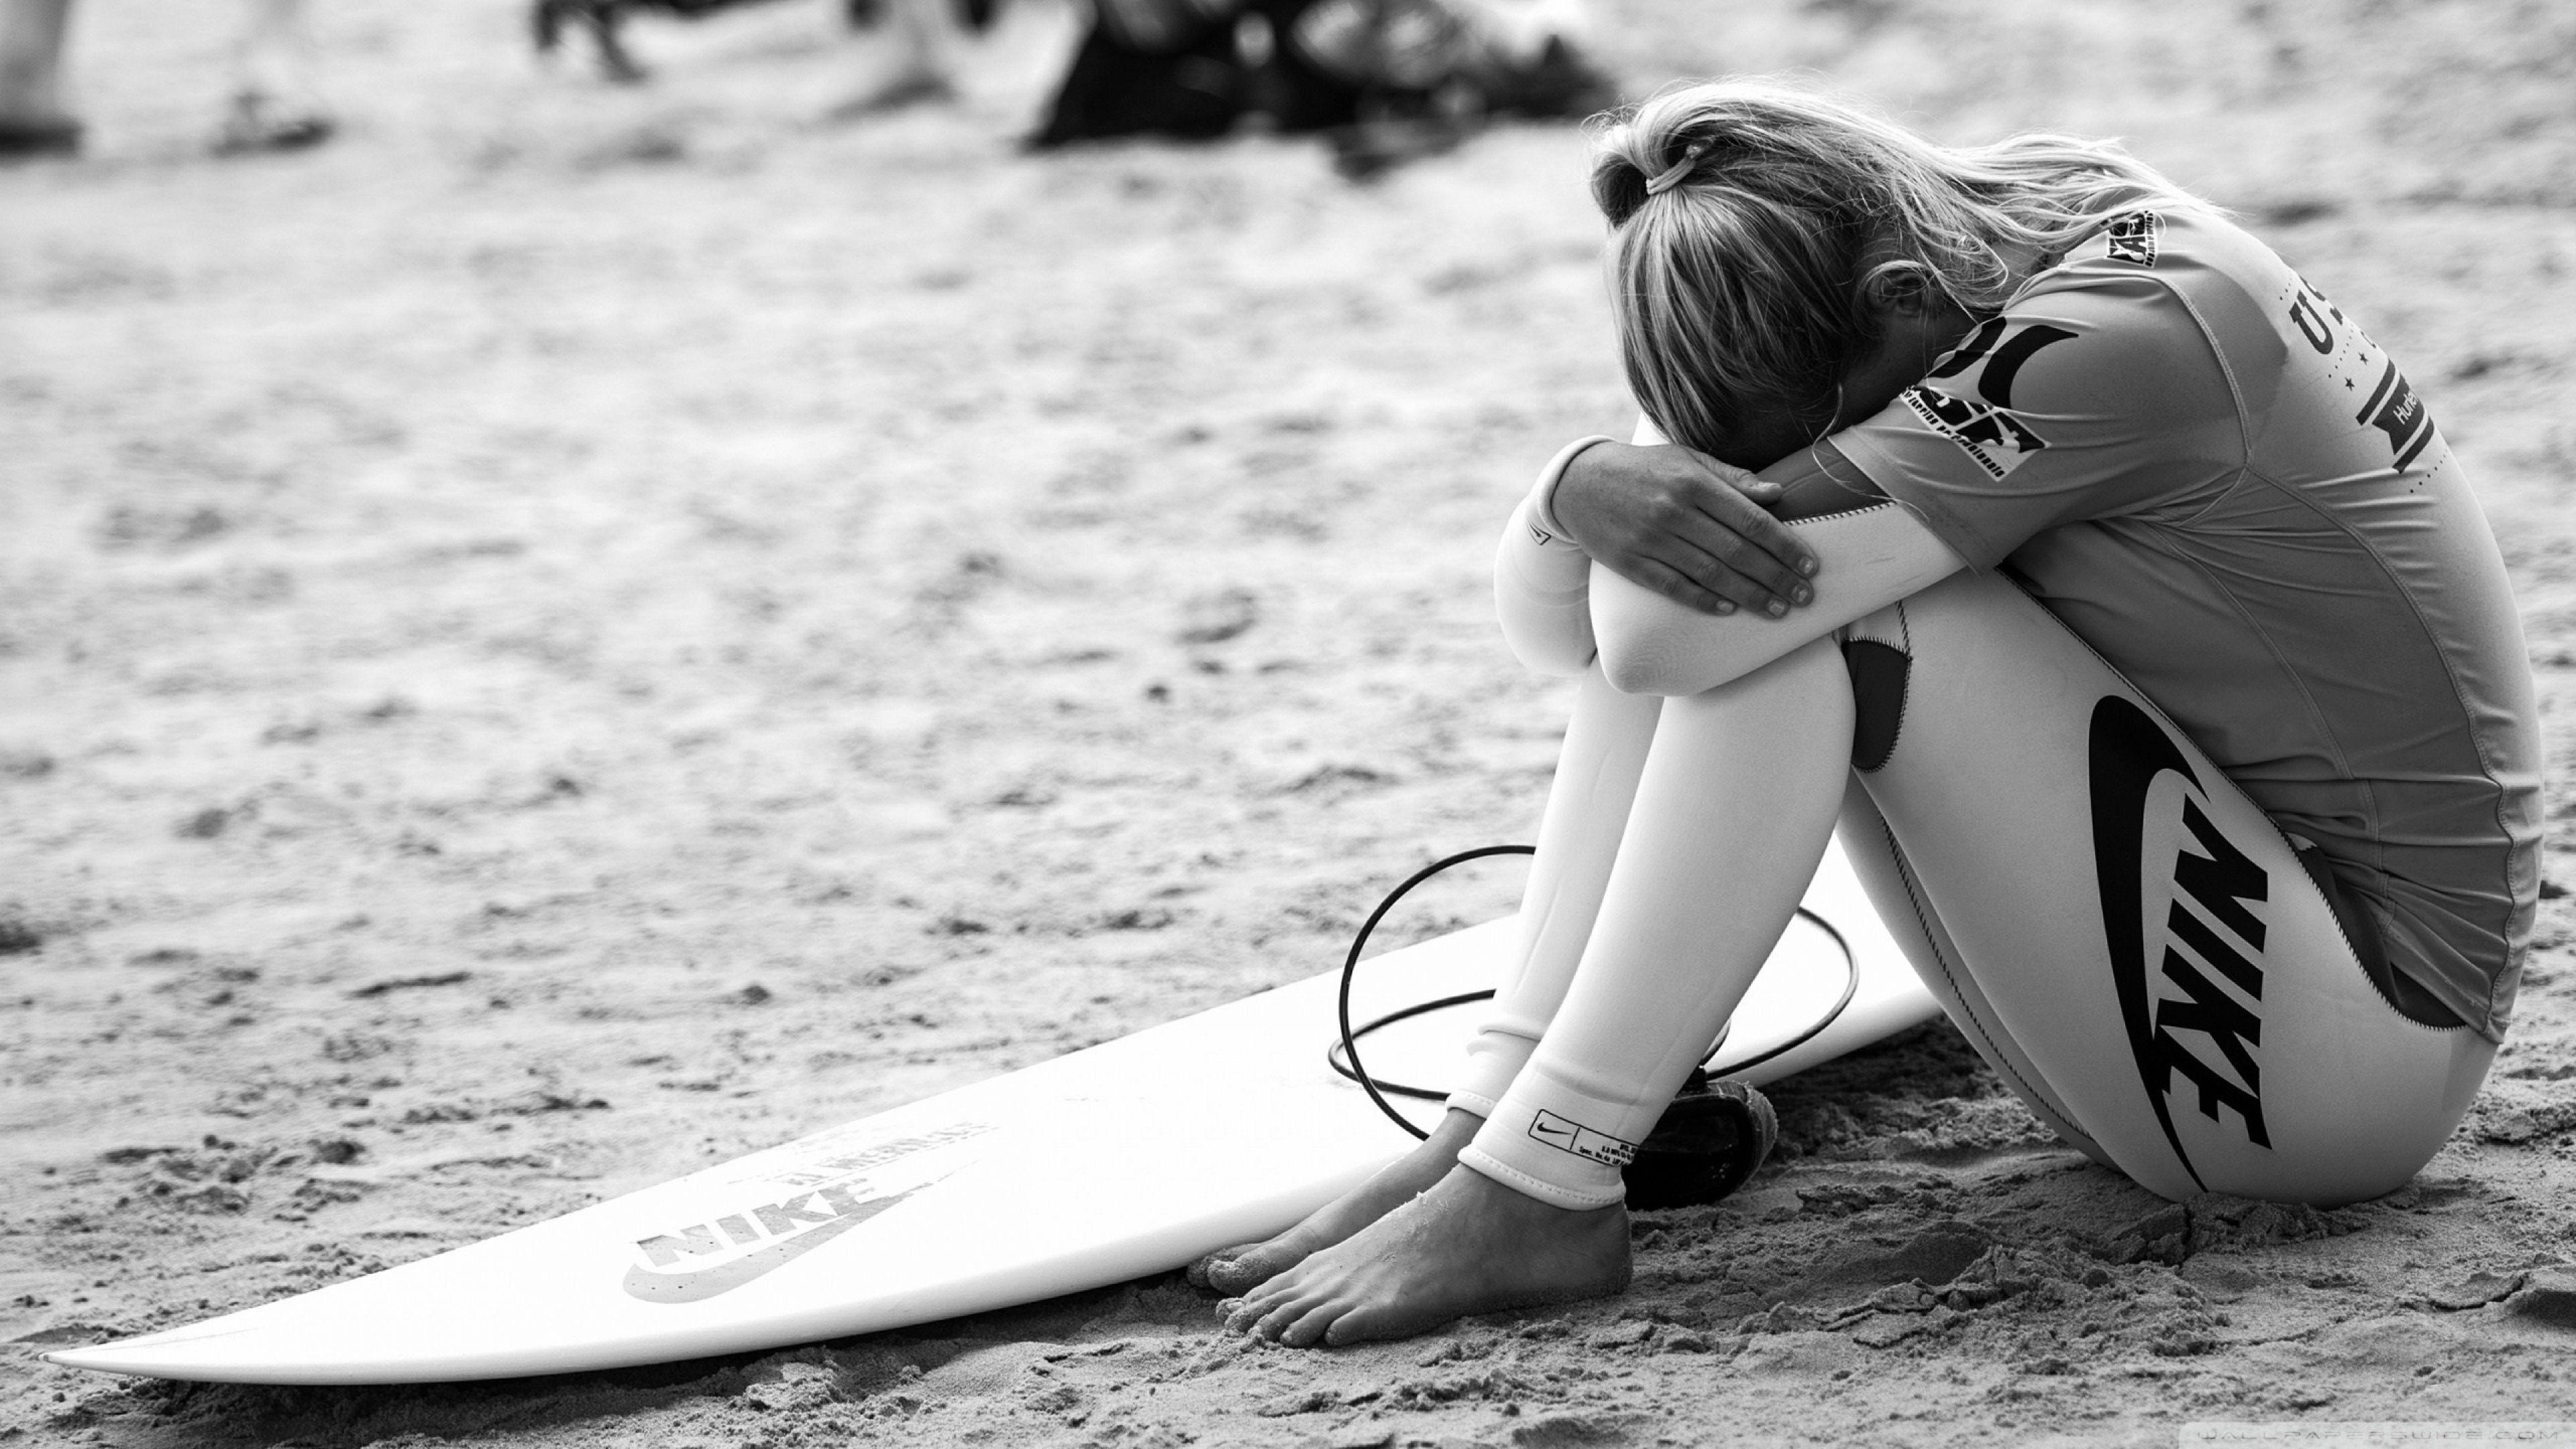 Surfer Girl Wallpapers Top Free Surfer Girl Backgrounds Wallpaperaccess